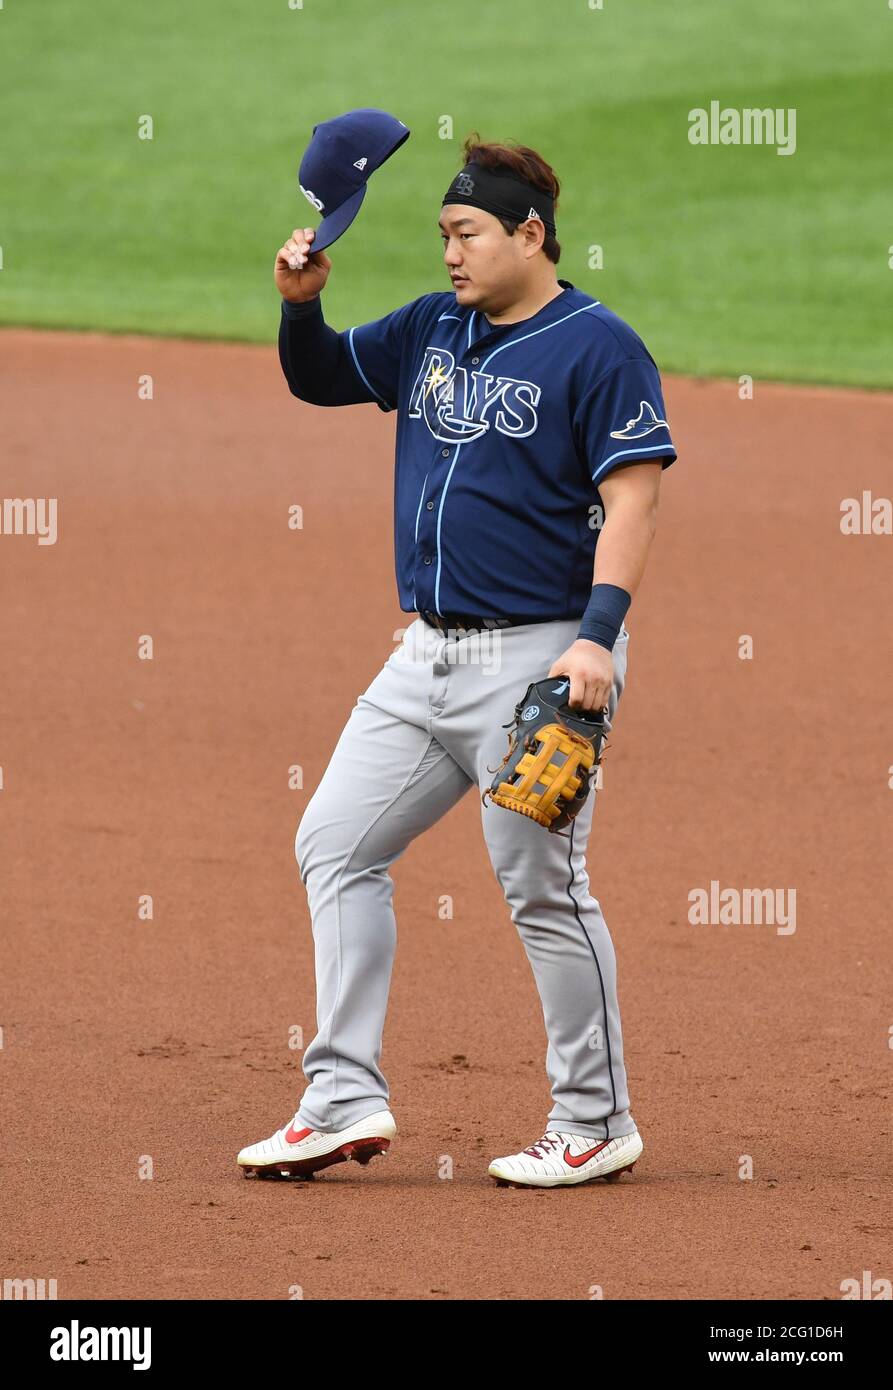 Washington, United States. 08th Sep, 2020. Tampa Bay Rays first baseman  Ji-Man Choi adjust his hat as he plays first base against Washington  Nationals in the first inning at Nationals Park in